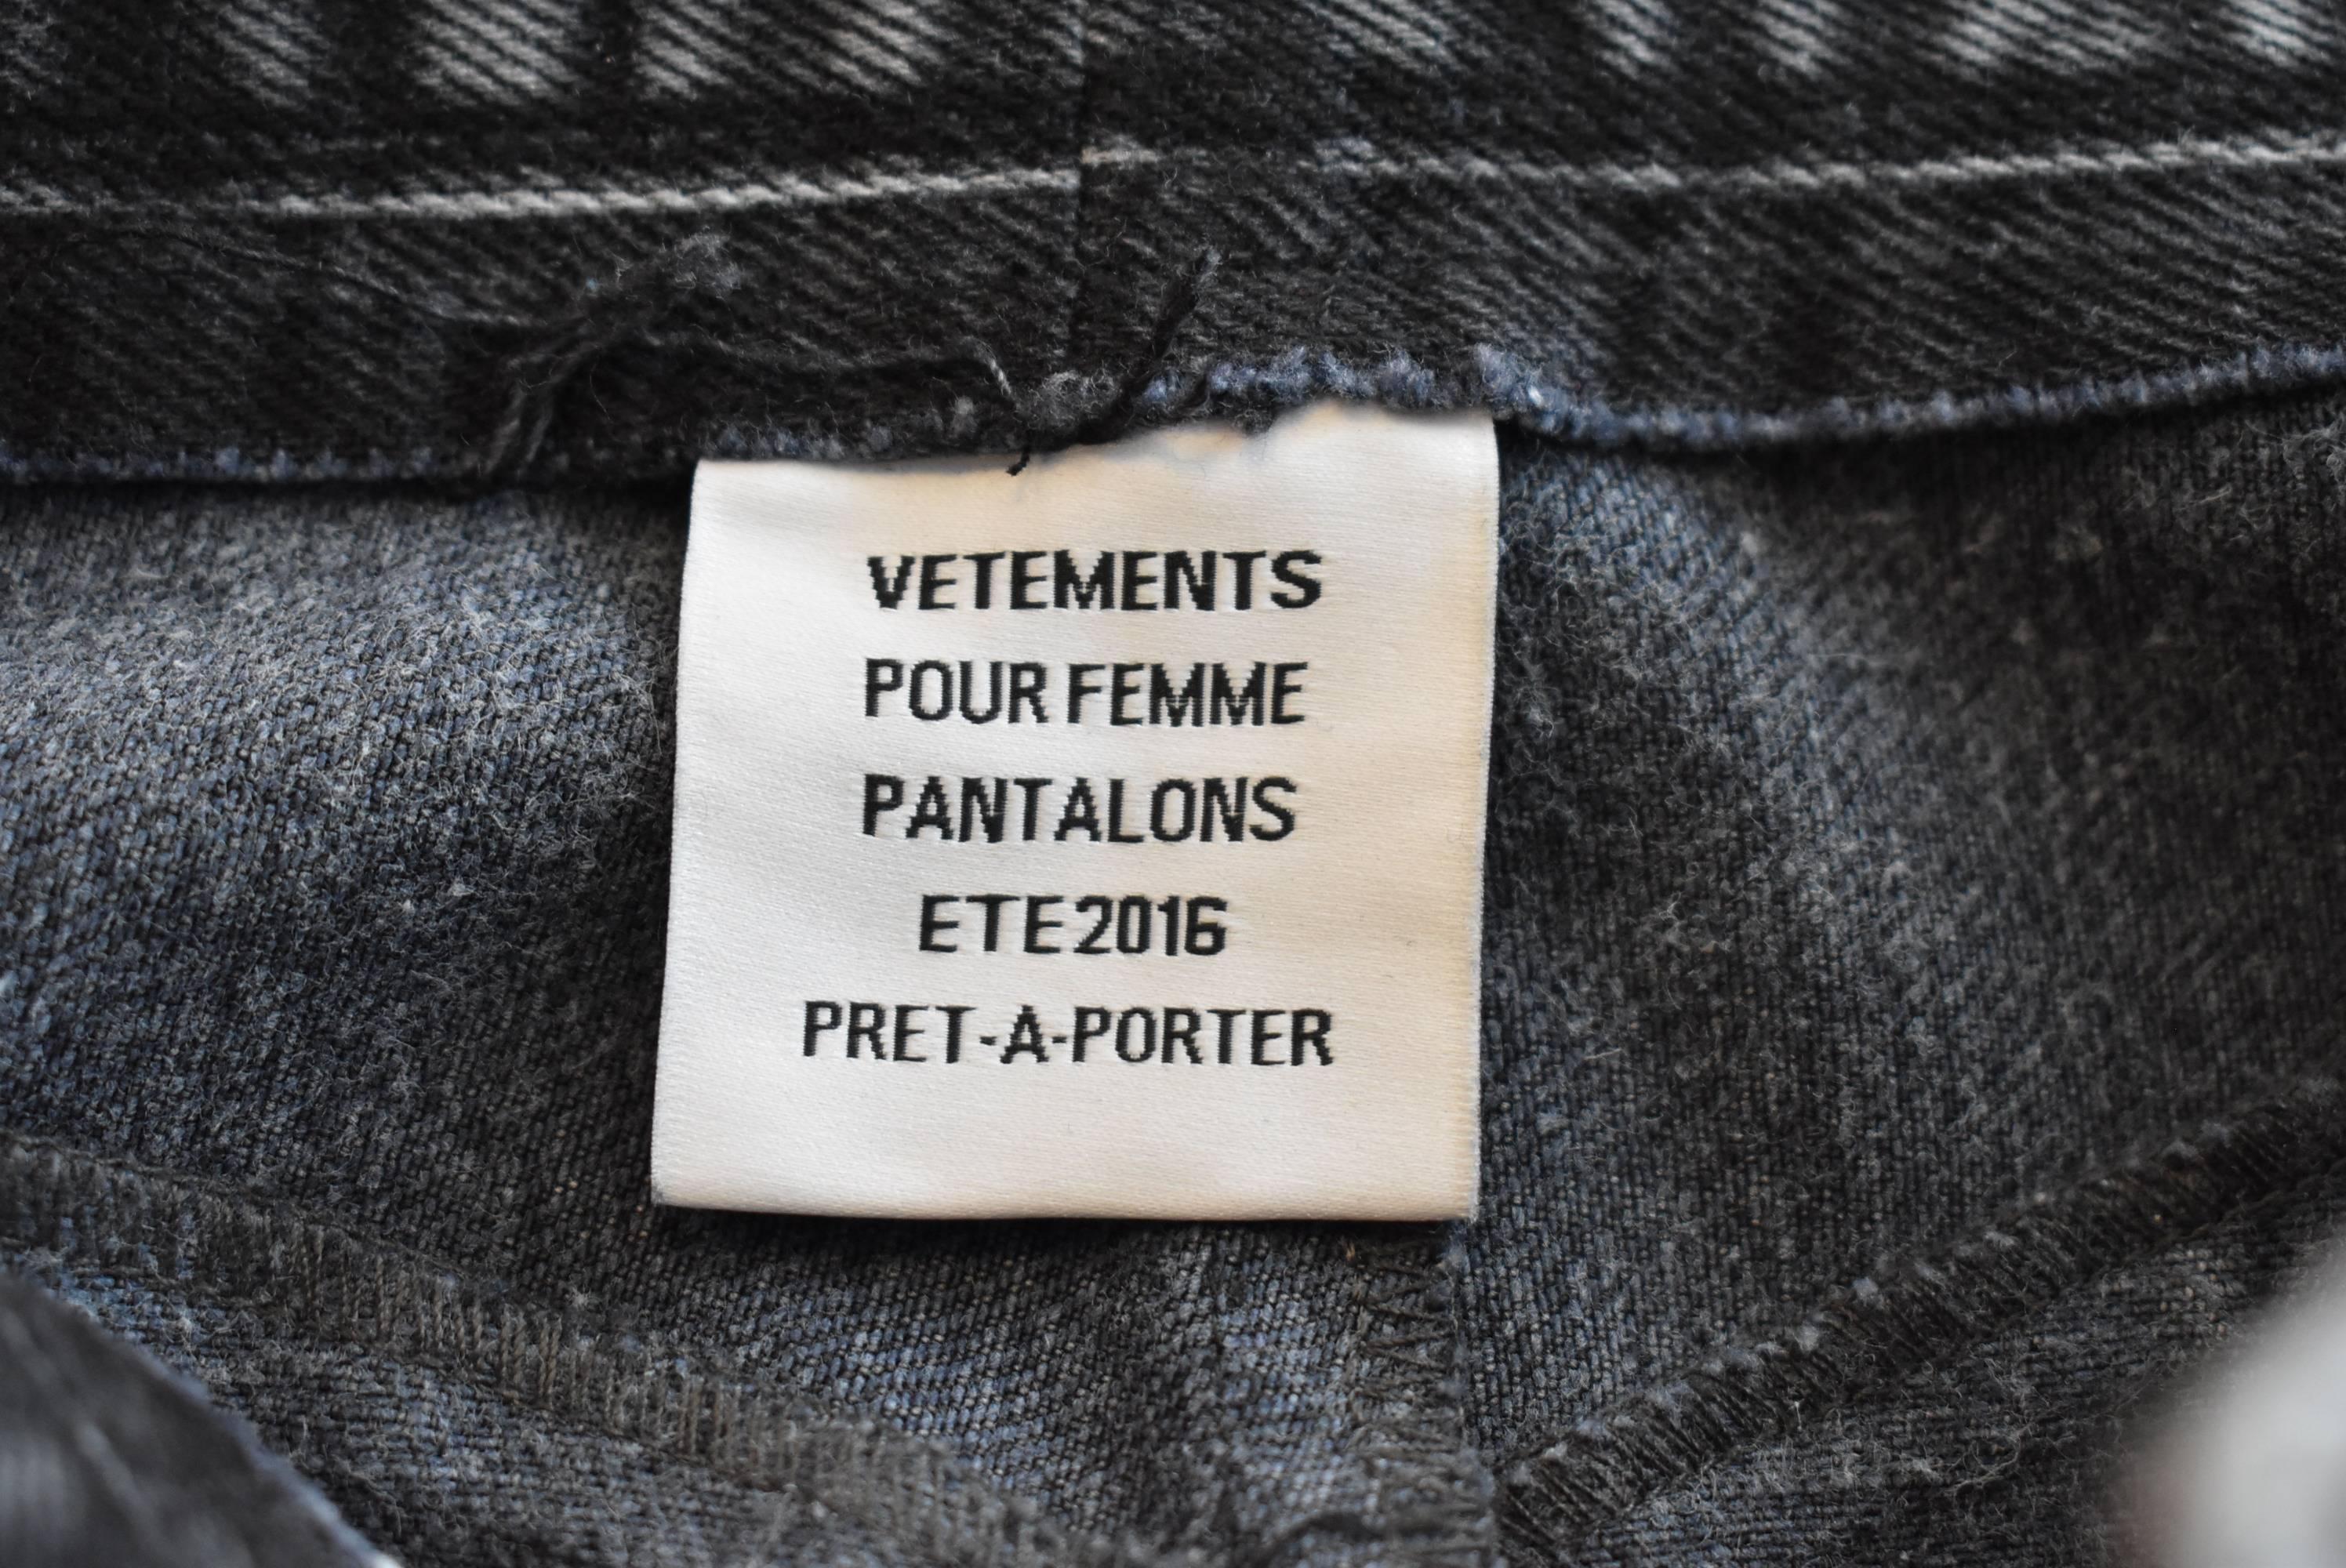 Vetements S/S 2016 Re-worked Levi’s Deconstructed Distressed Jeans 3